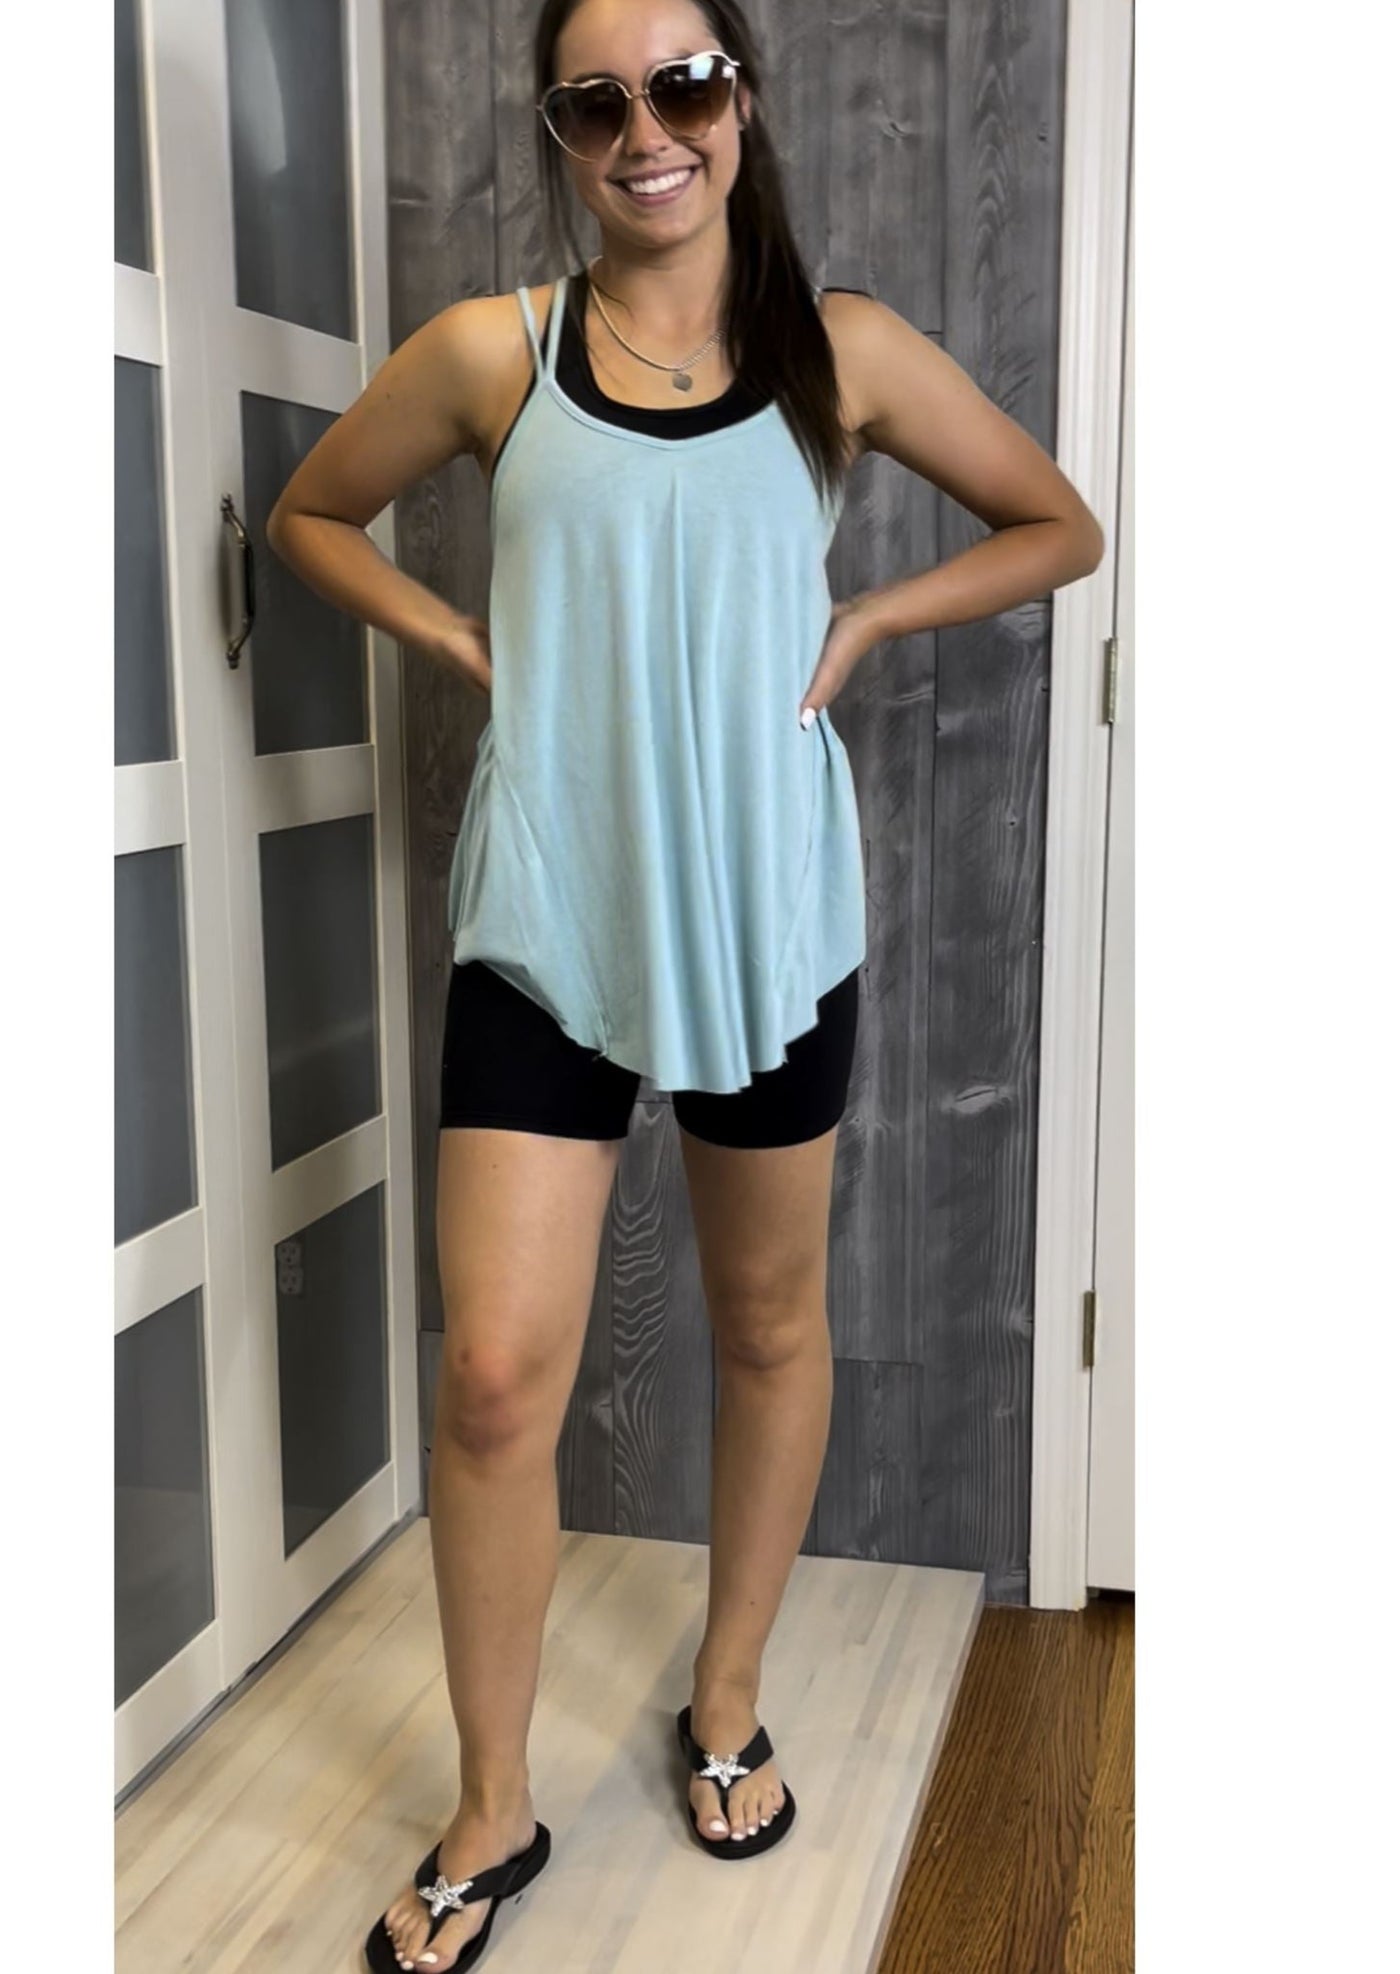 USA Made Strappy Crossed Back Soft Flowy Ladies Tank Top | Brand: Bucket List | Style # T1714 | Made in USA | Classy Cozy Cool Women’s Clothing Boutique